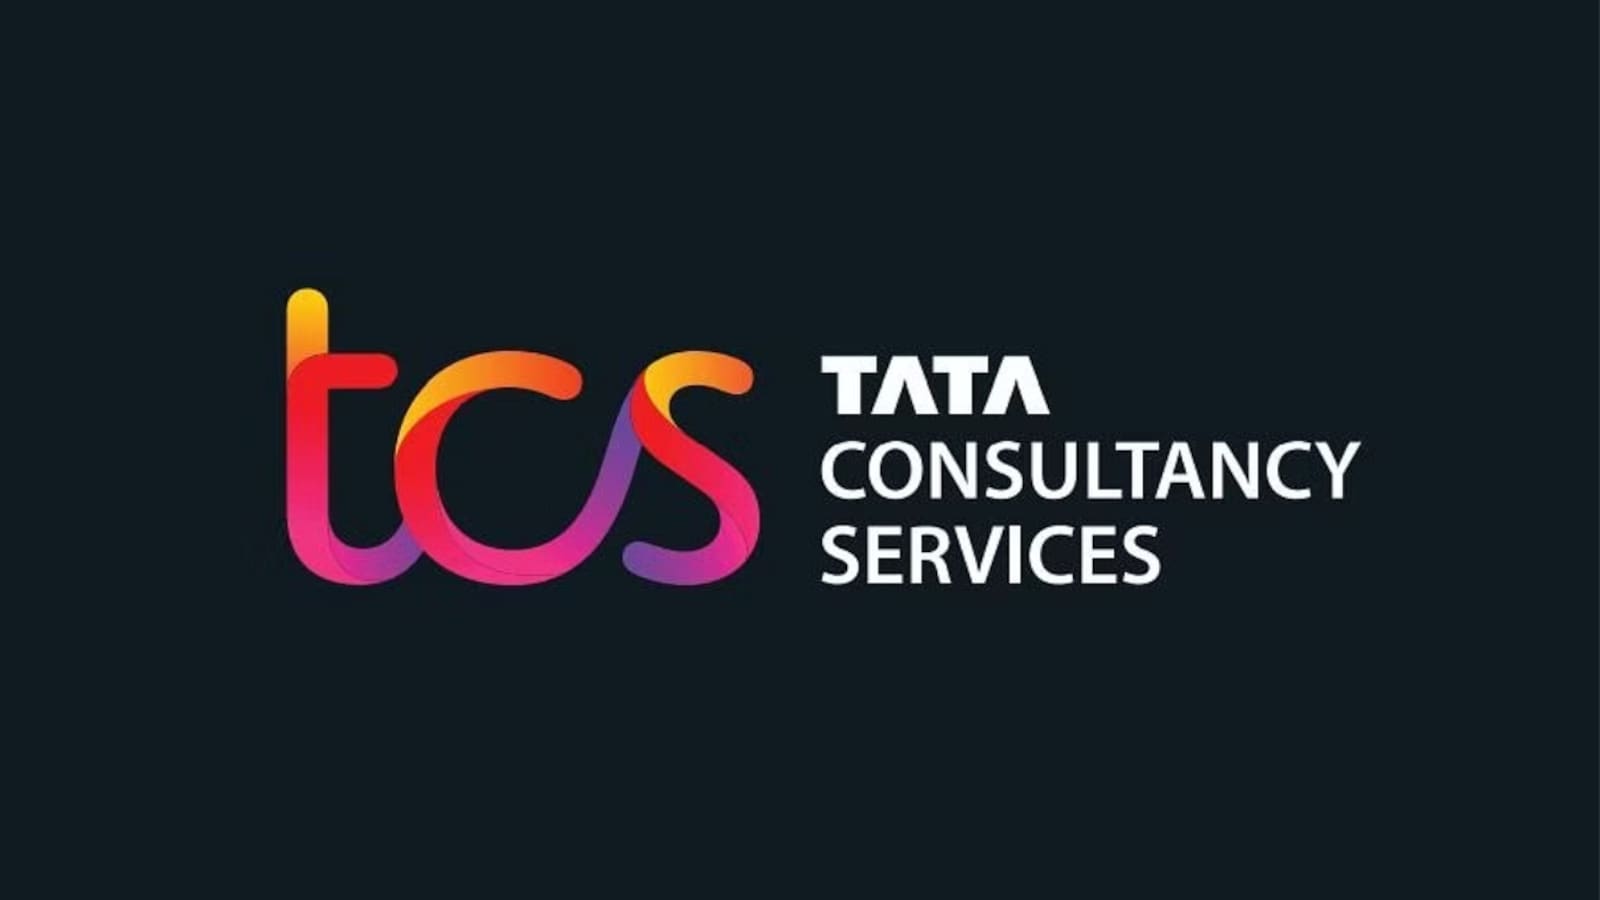 TCS to buyback Rs 17,000 crore worth of shares at 15% premium